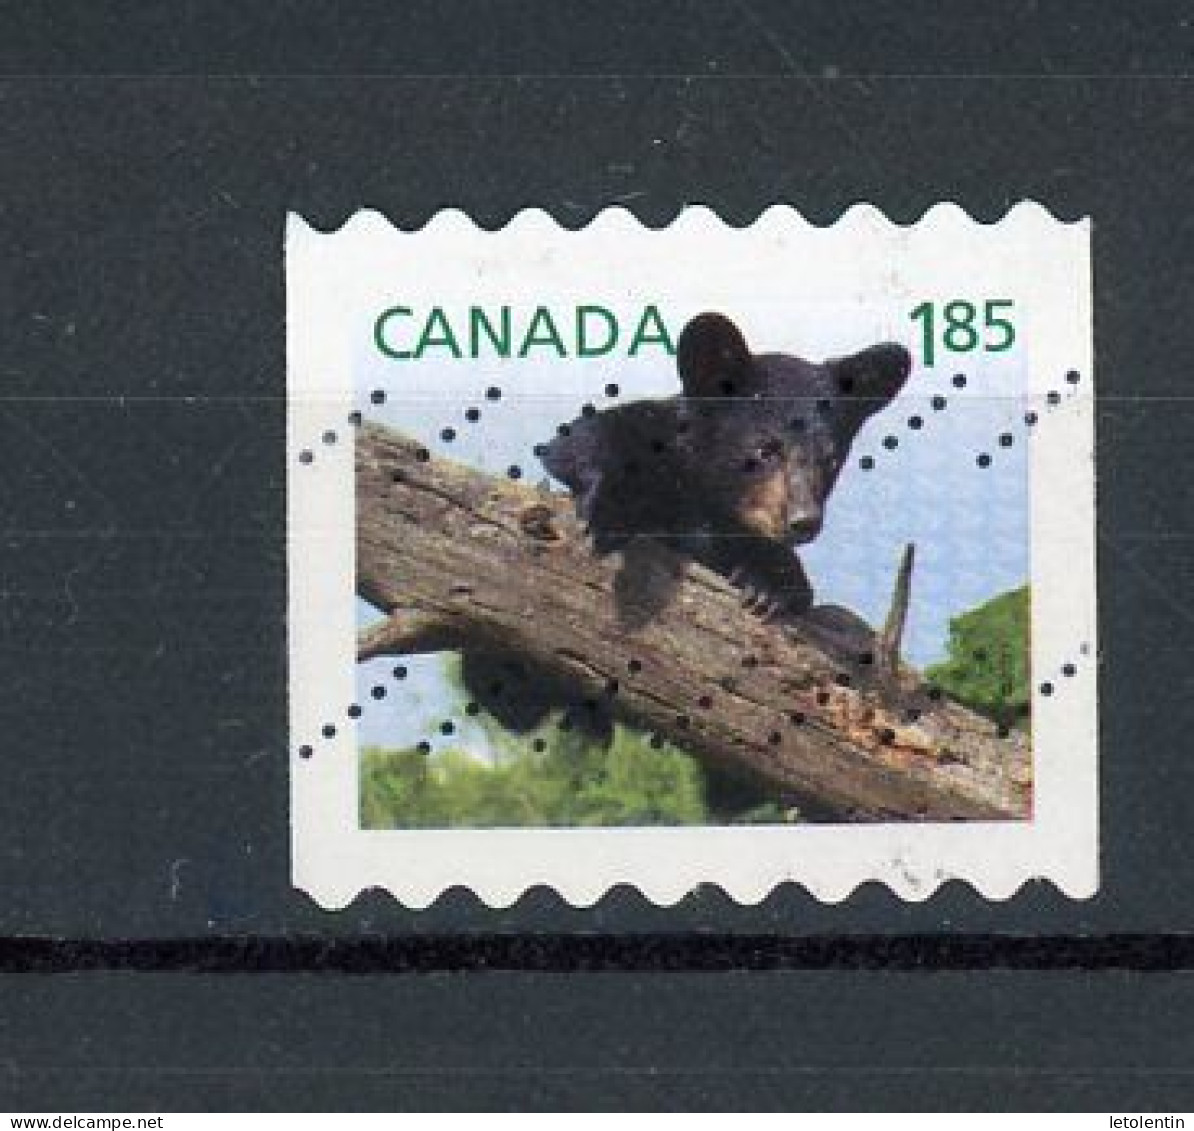 CANADA - FAUNE - N° Yvert 2806 Obli. - Used Stamps